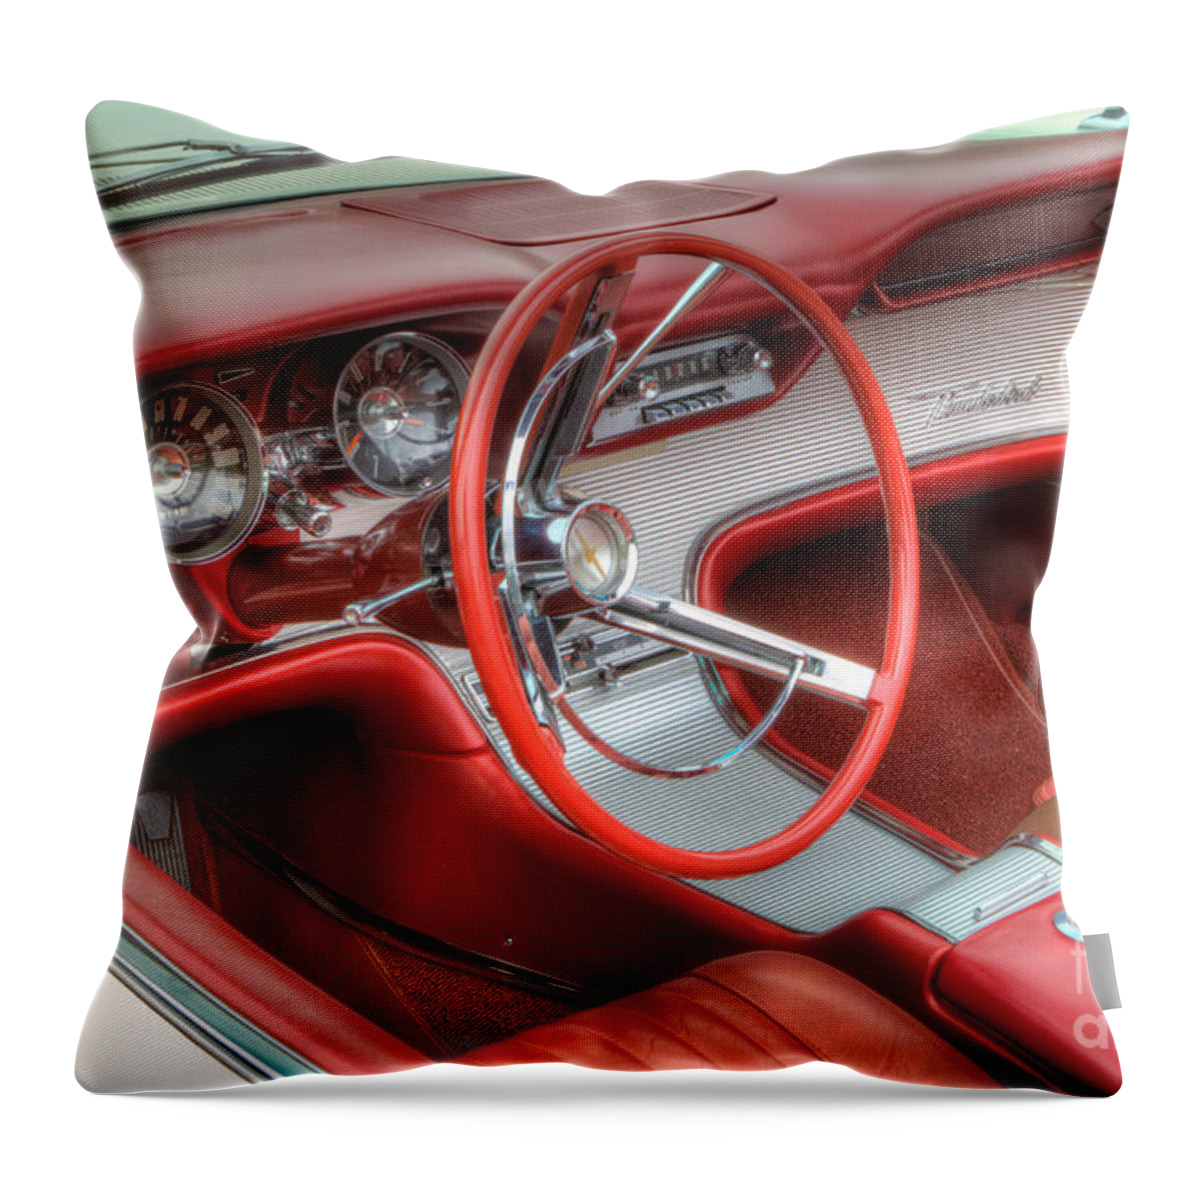 1962 Throw Pillow featuring the photograph 1962 Thunderbird Dash by Jerry Fornarotto